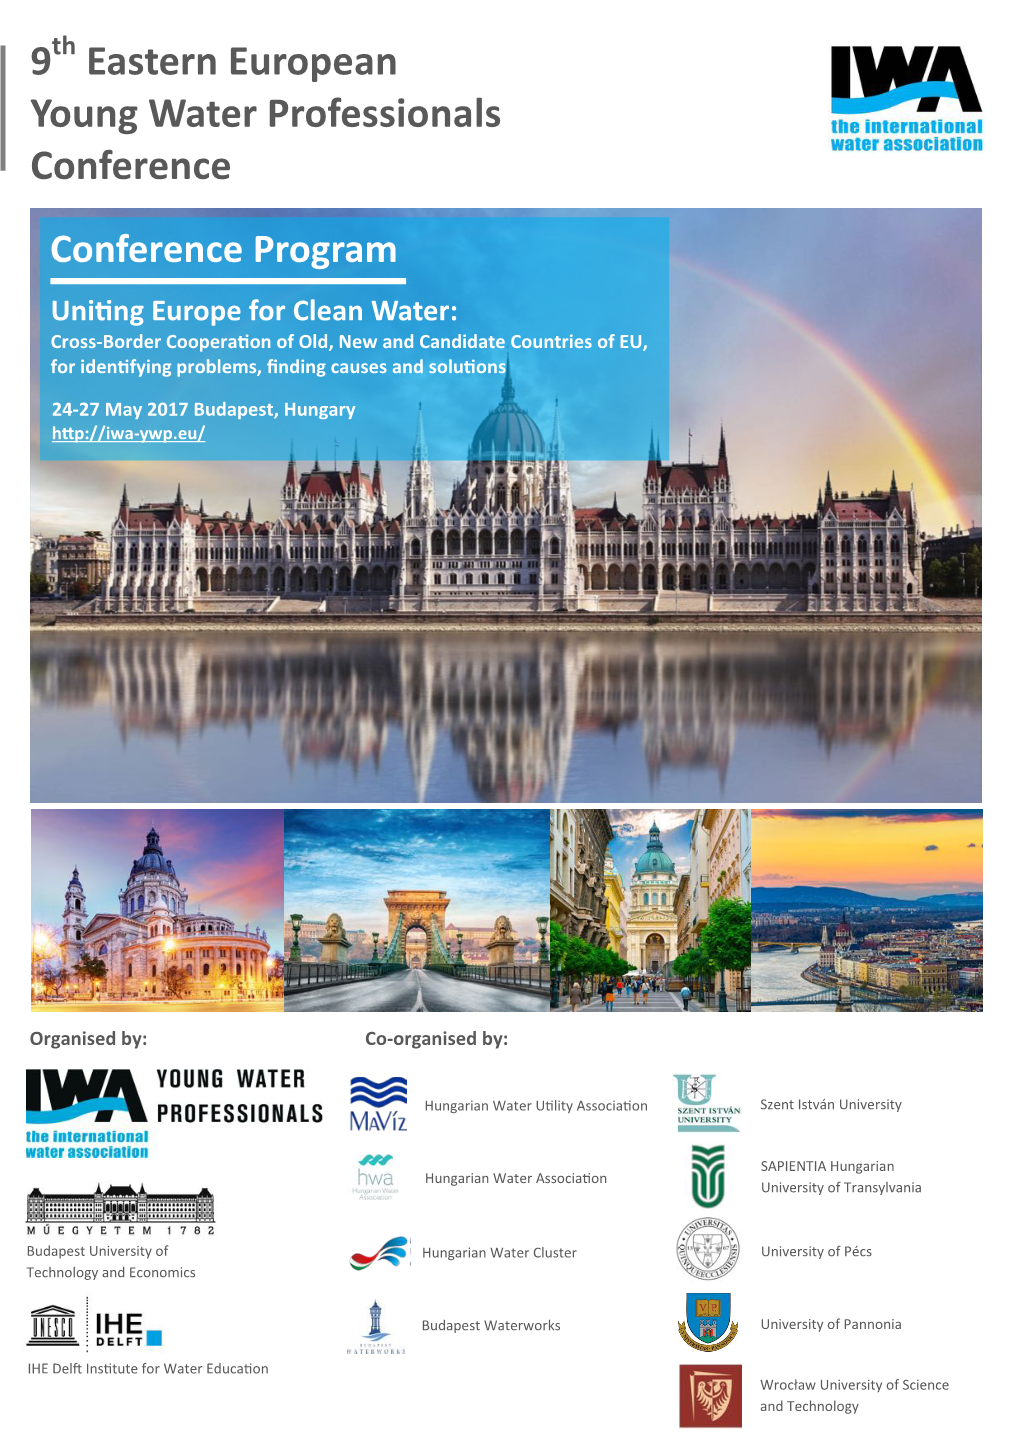 9 Eastern European Young Water Professionals Conference